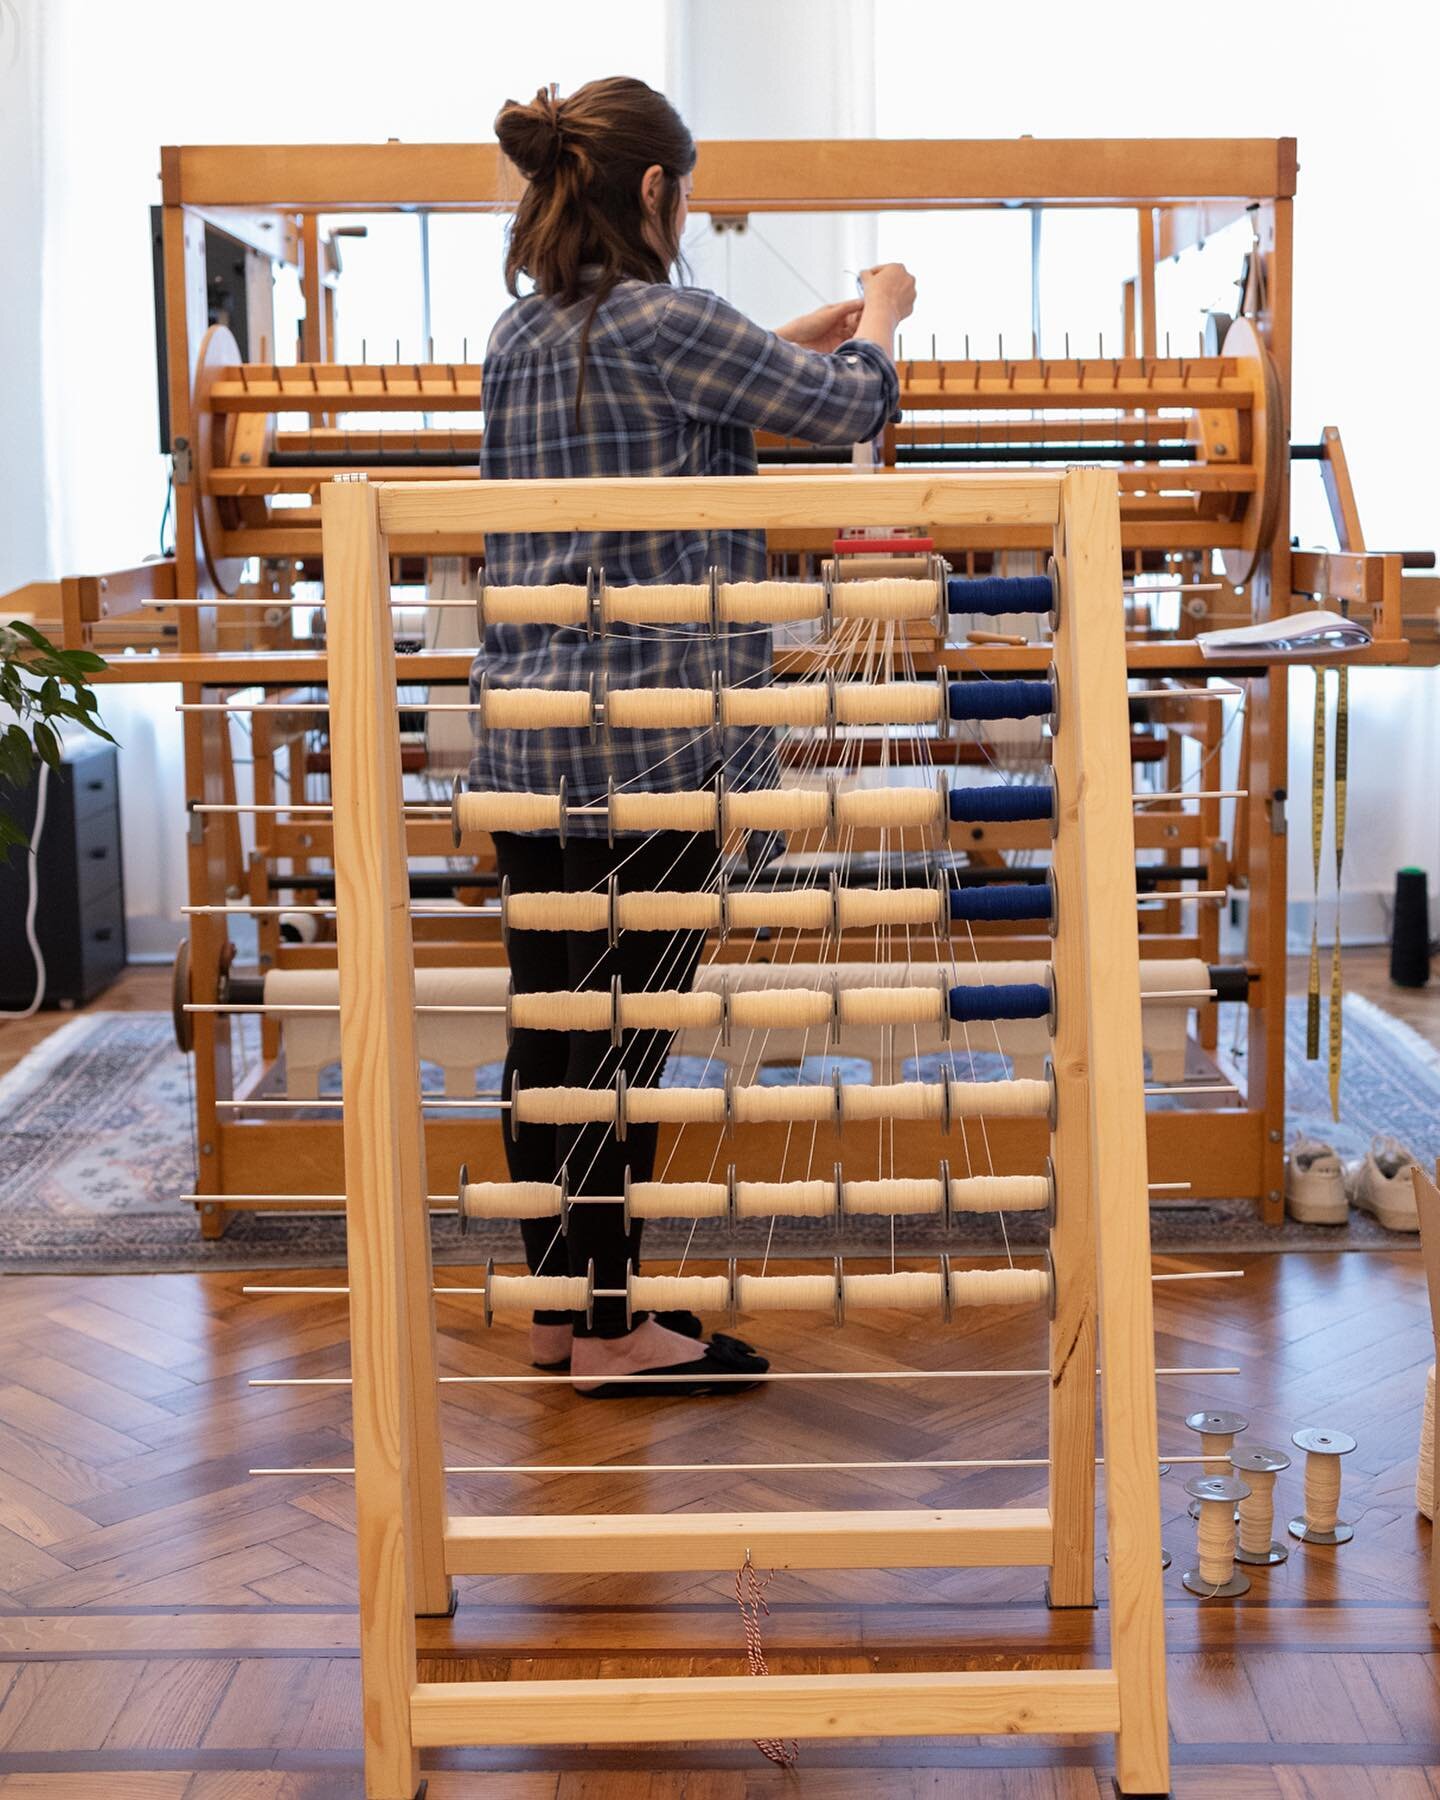 Setting up the loom at full width for the first time &bull; For this loom I use the methode of sectional warping to be able to put on longer and wider warps. With this methode you wind all the yarn you need on smaller spools first, before winding the